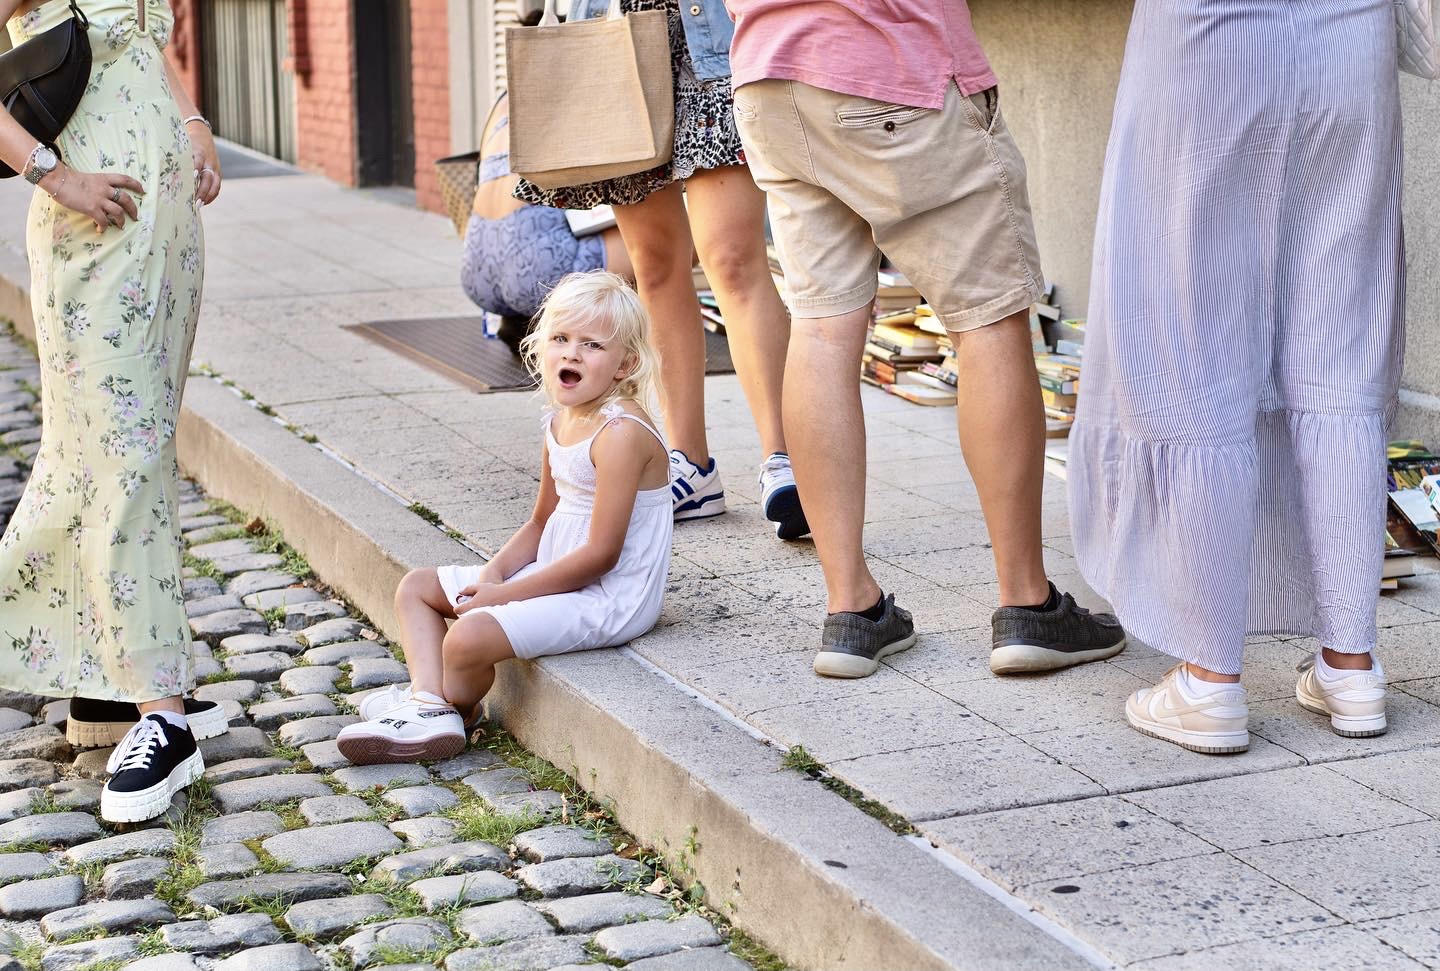 A little girl with blonde hair wears a sleeveless white dress and sits on a concrete sidewalk with her legs crossed.